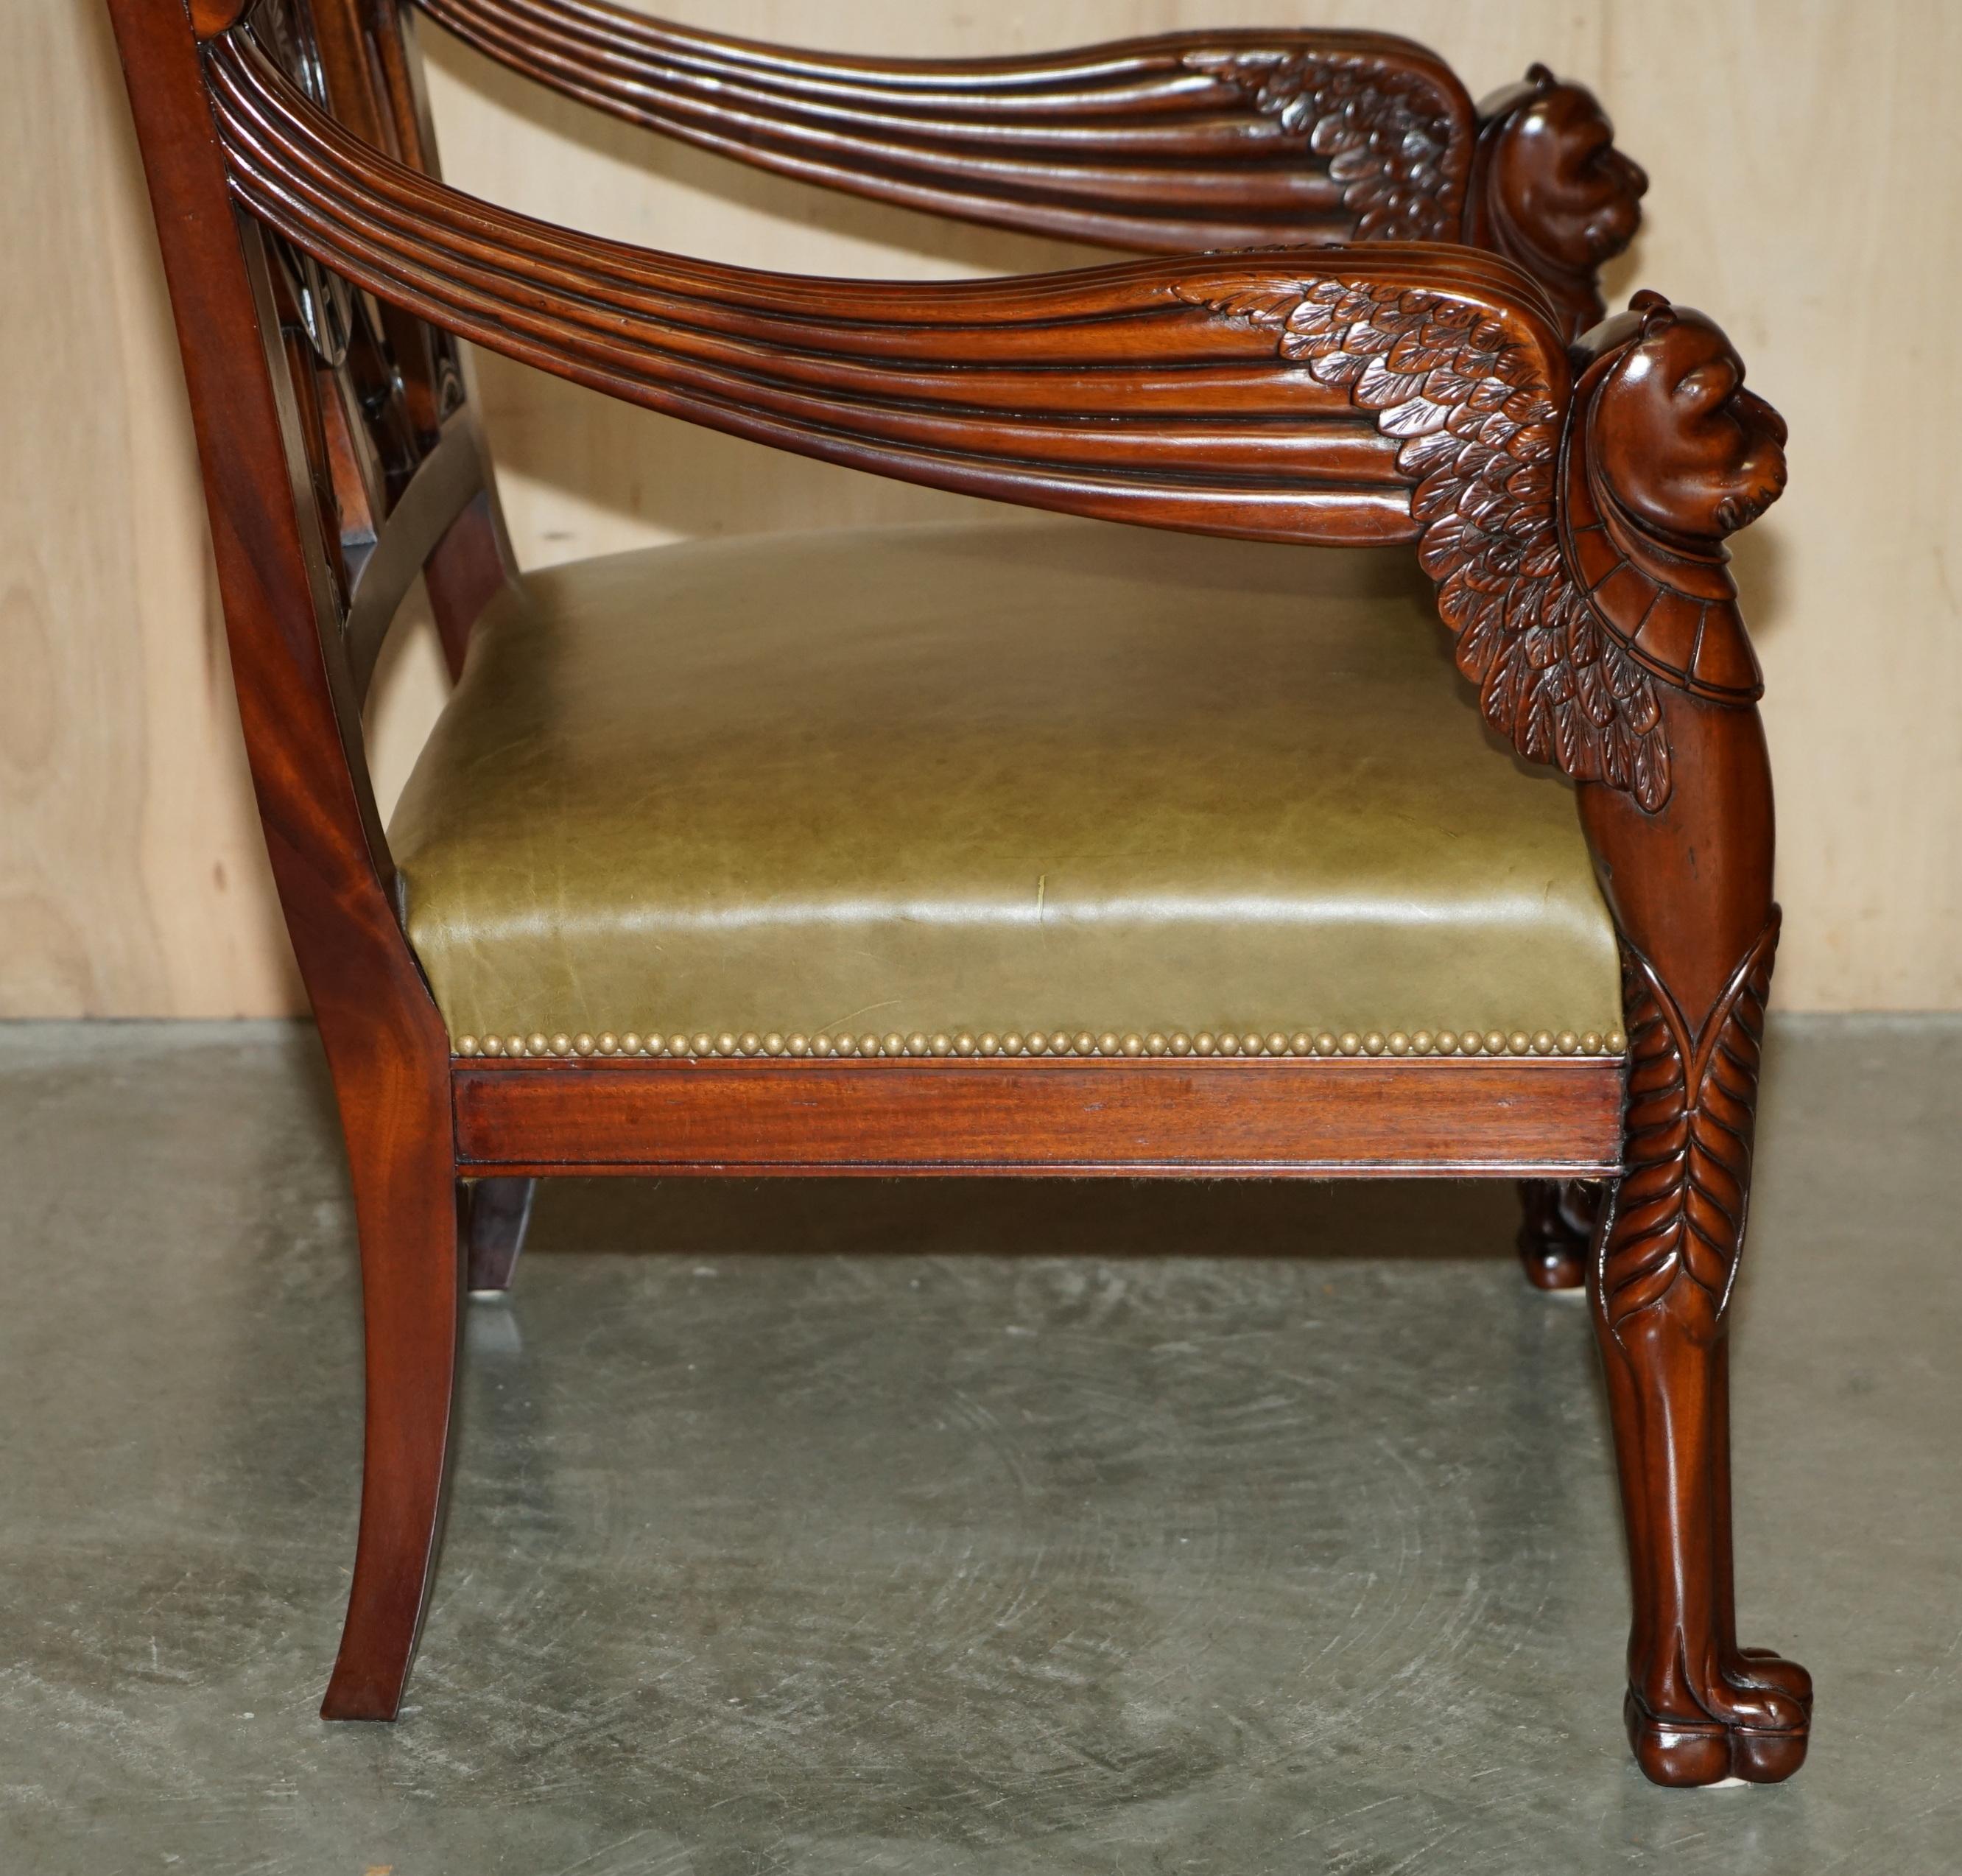 EXQUISITE PAIR OF HAND CARVED HARDWOOD LiBRARY ARMCHAIRS LION GRIFFON WING ARMS For Sale 9